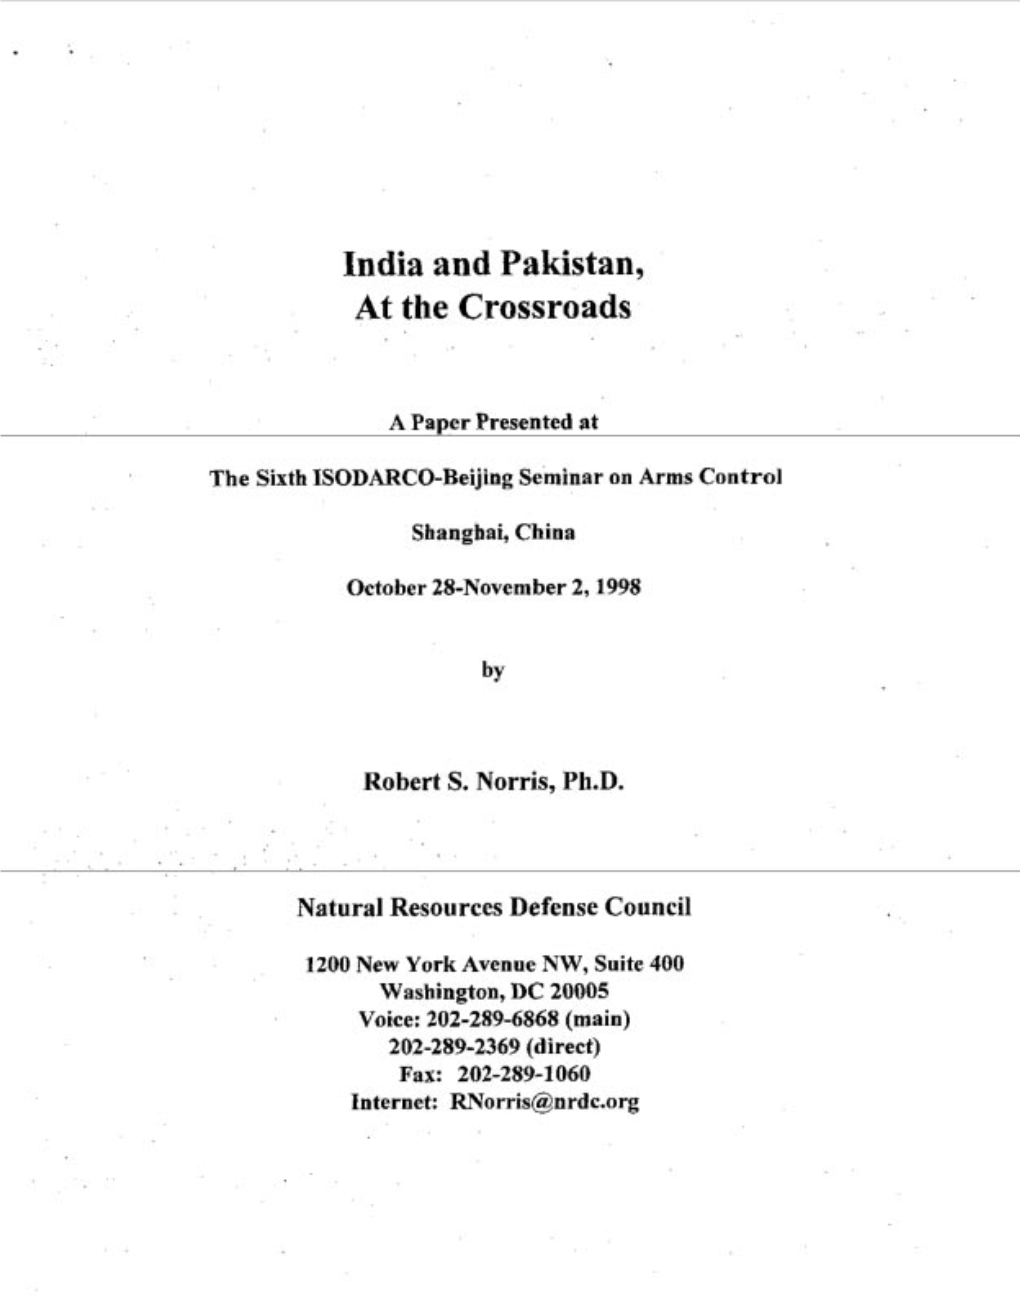 India and Pakistan, at the Crossroads